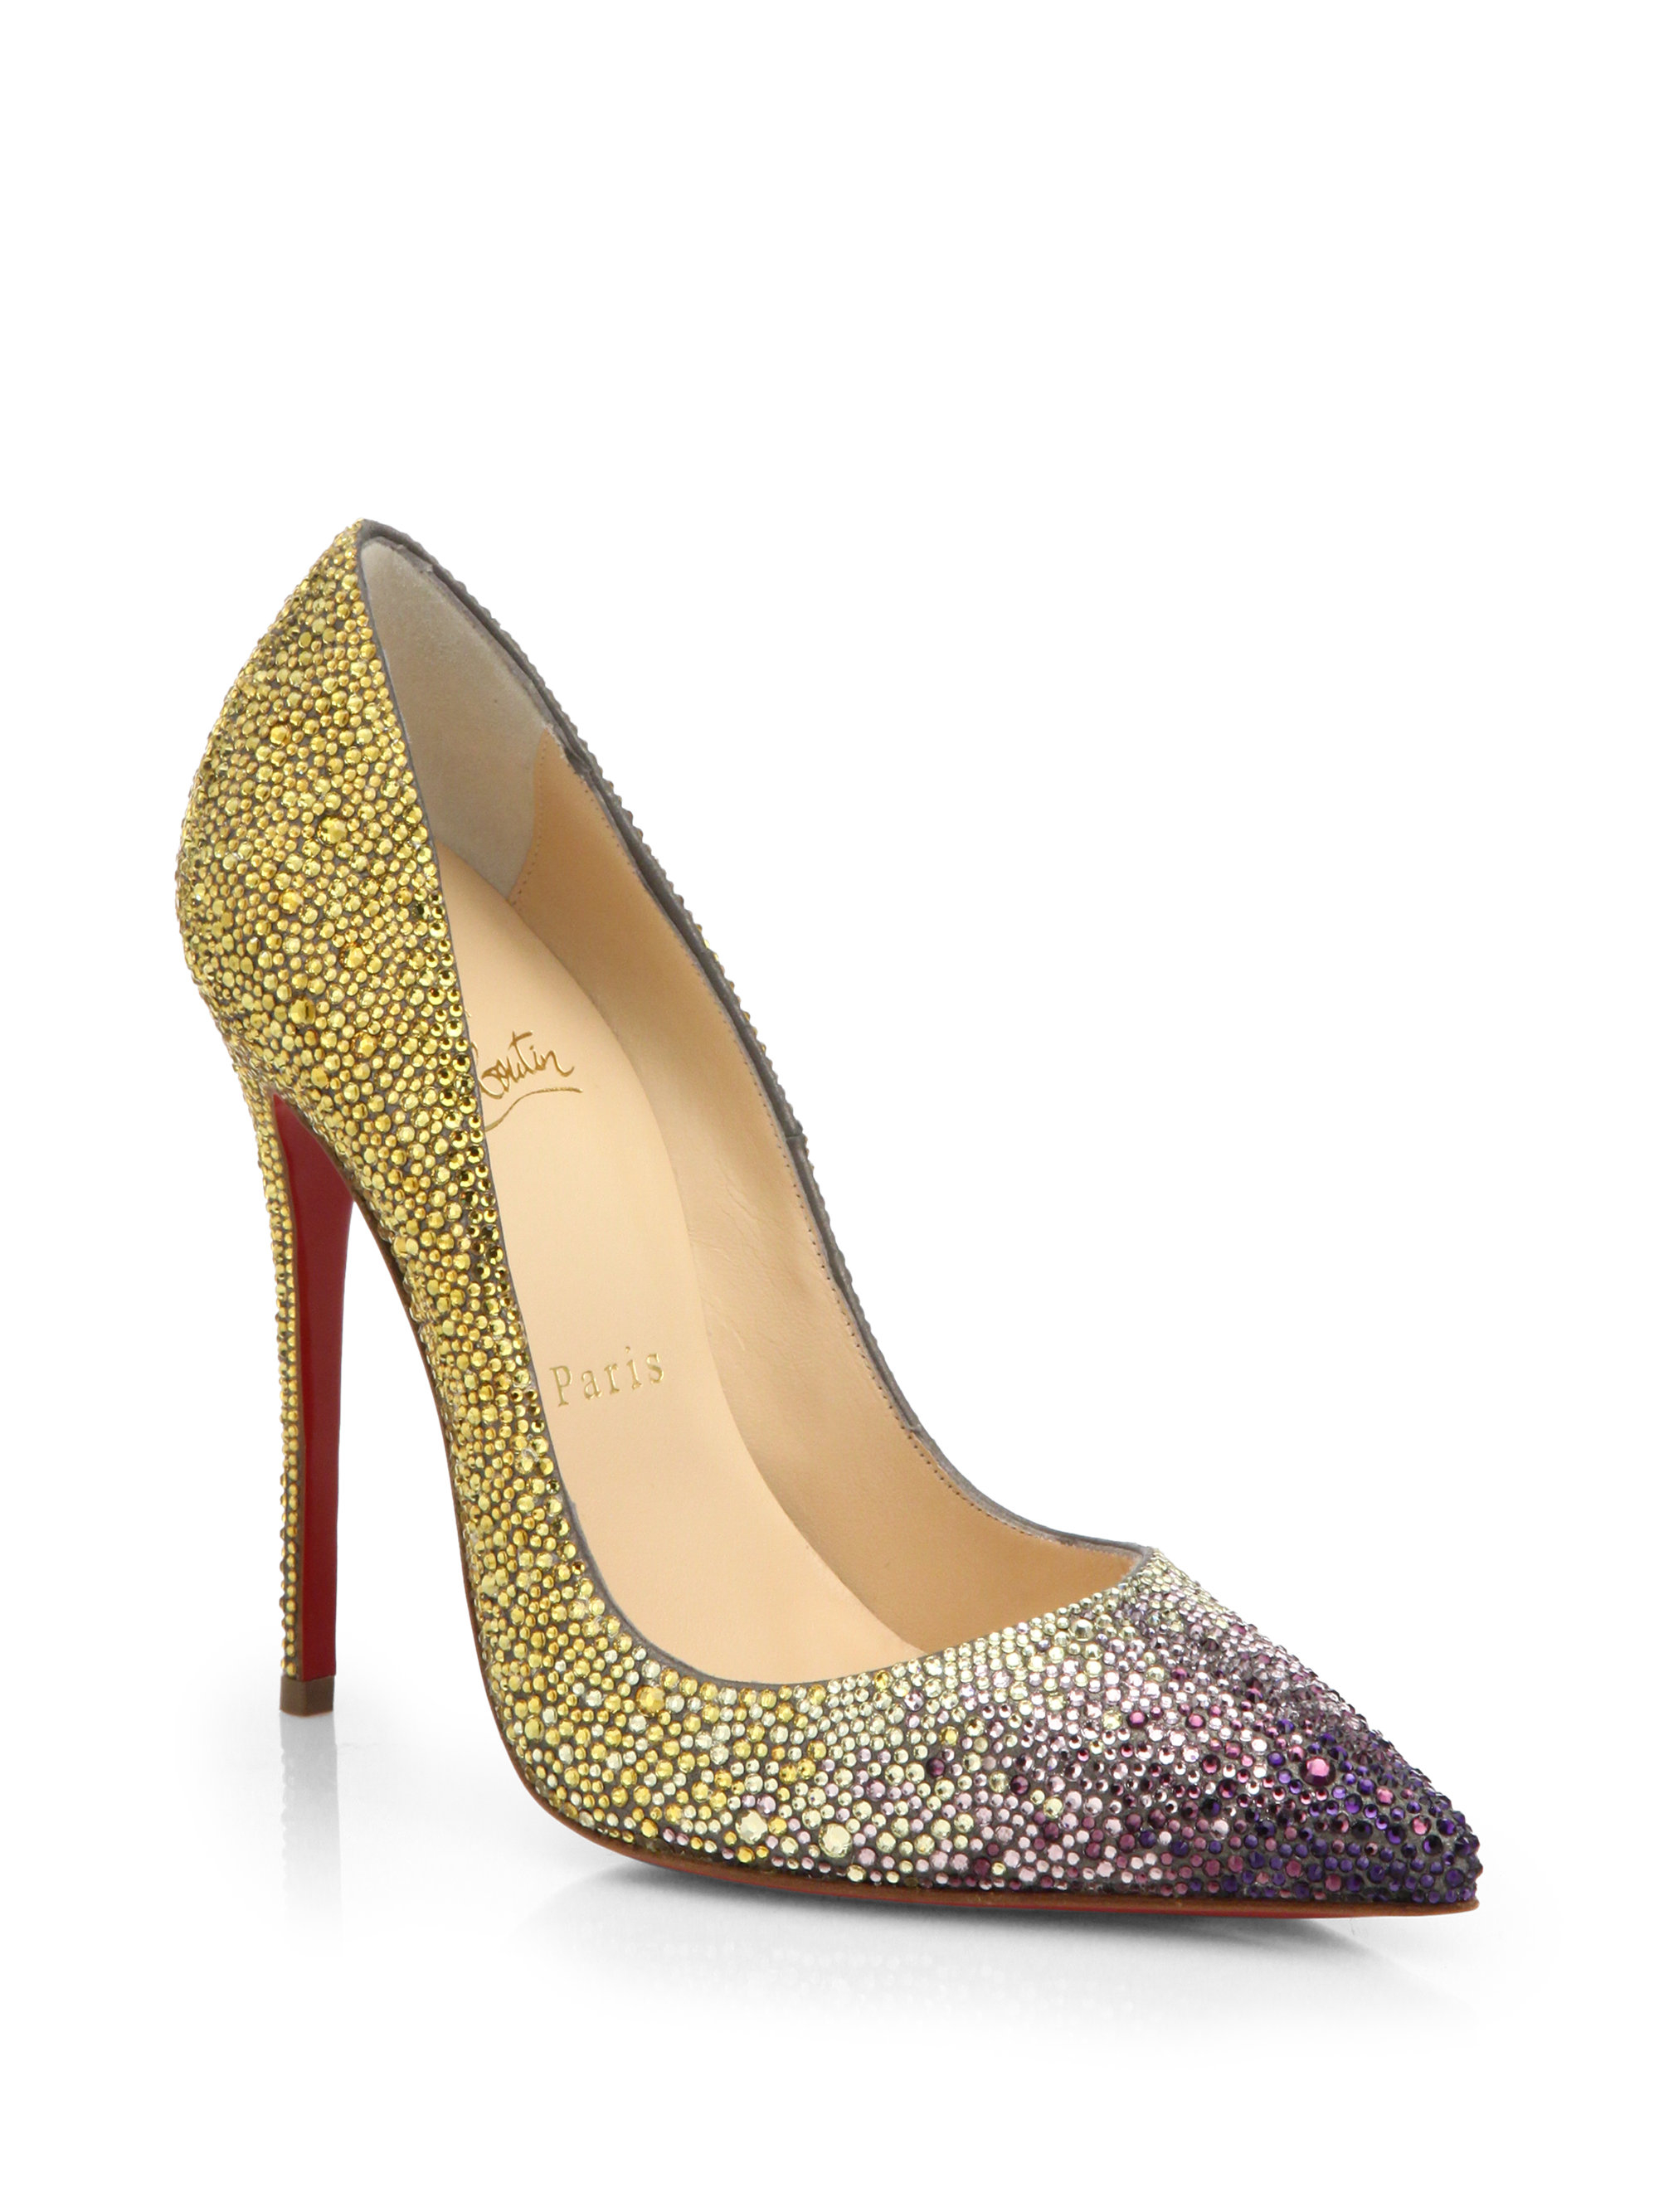 Lyst - Christian Louboutin So Kate Ombré Embellished Leather Pumps in ...